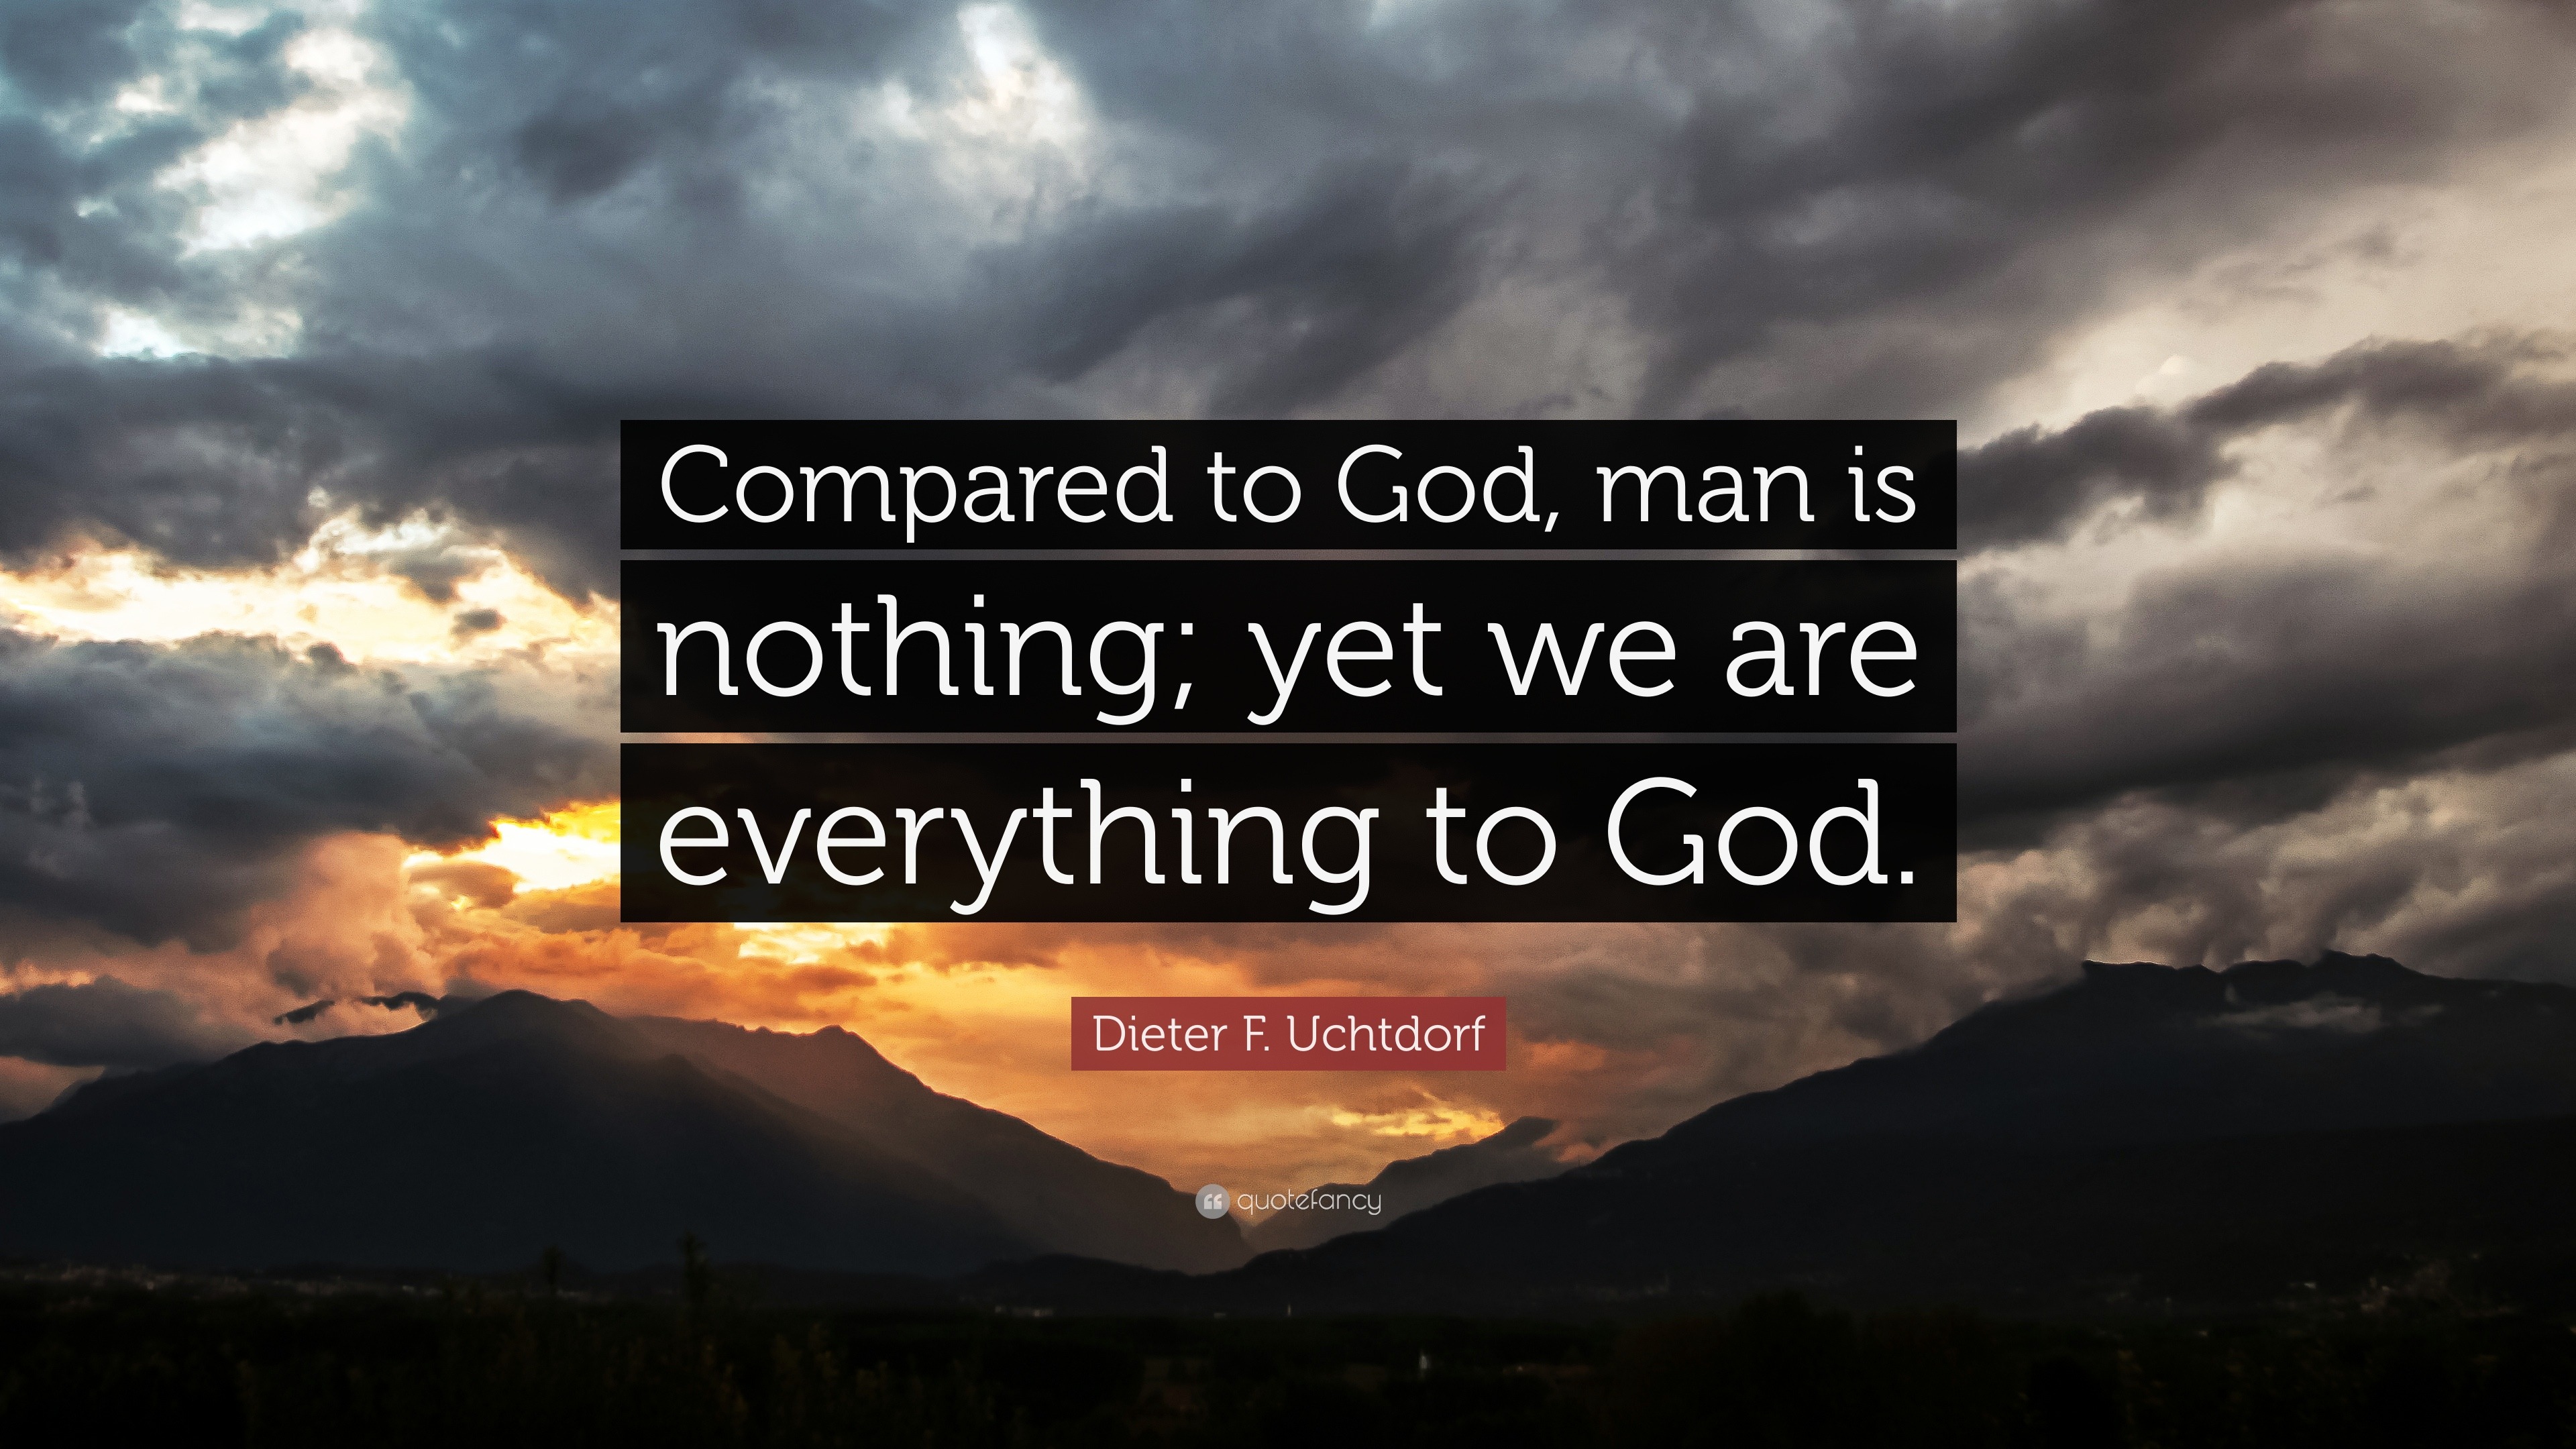 Dieter F. Uchtdorf Quote: “Compared to God, man is nothing; yet we are ...